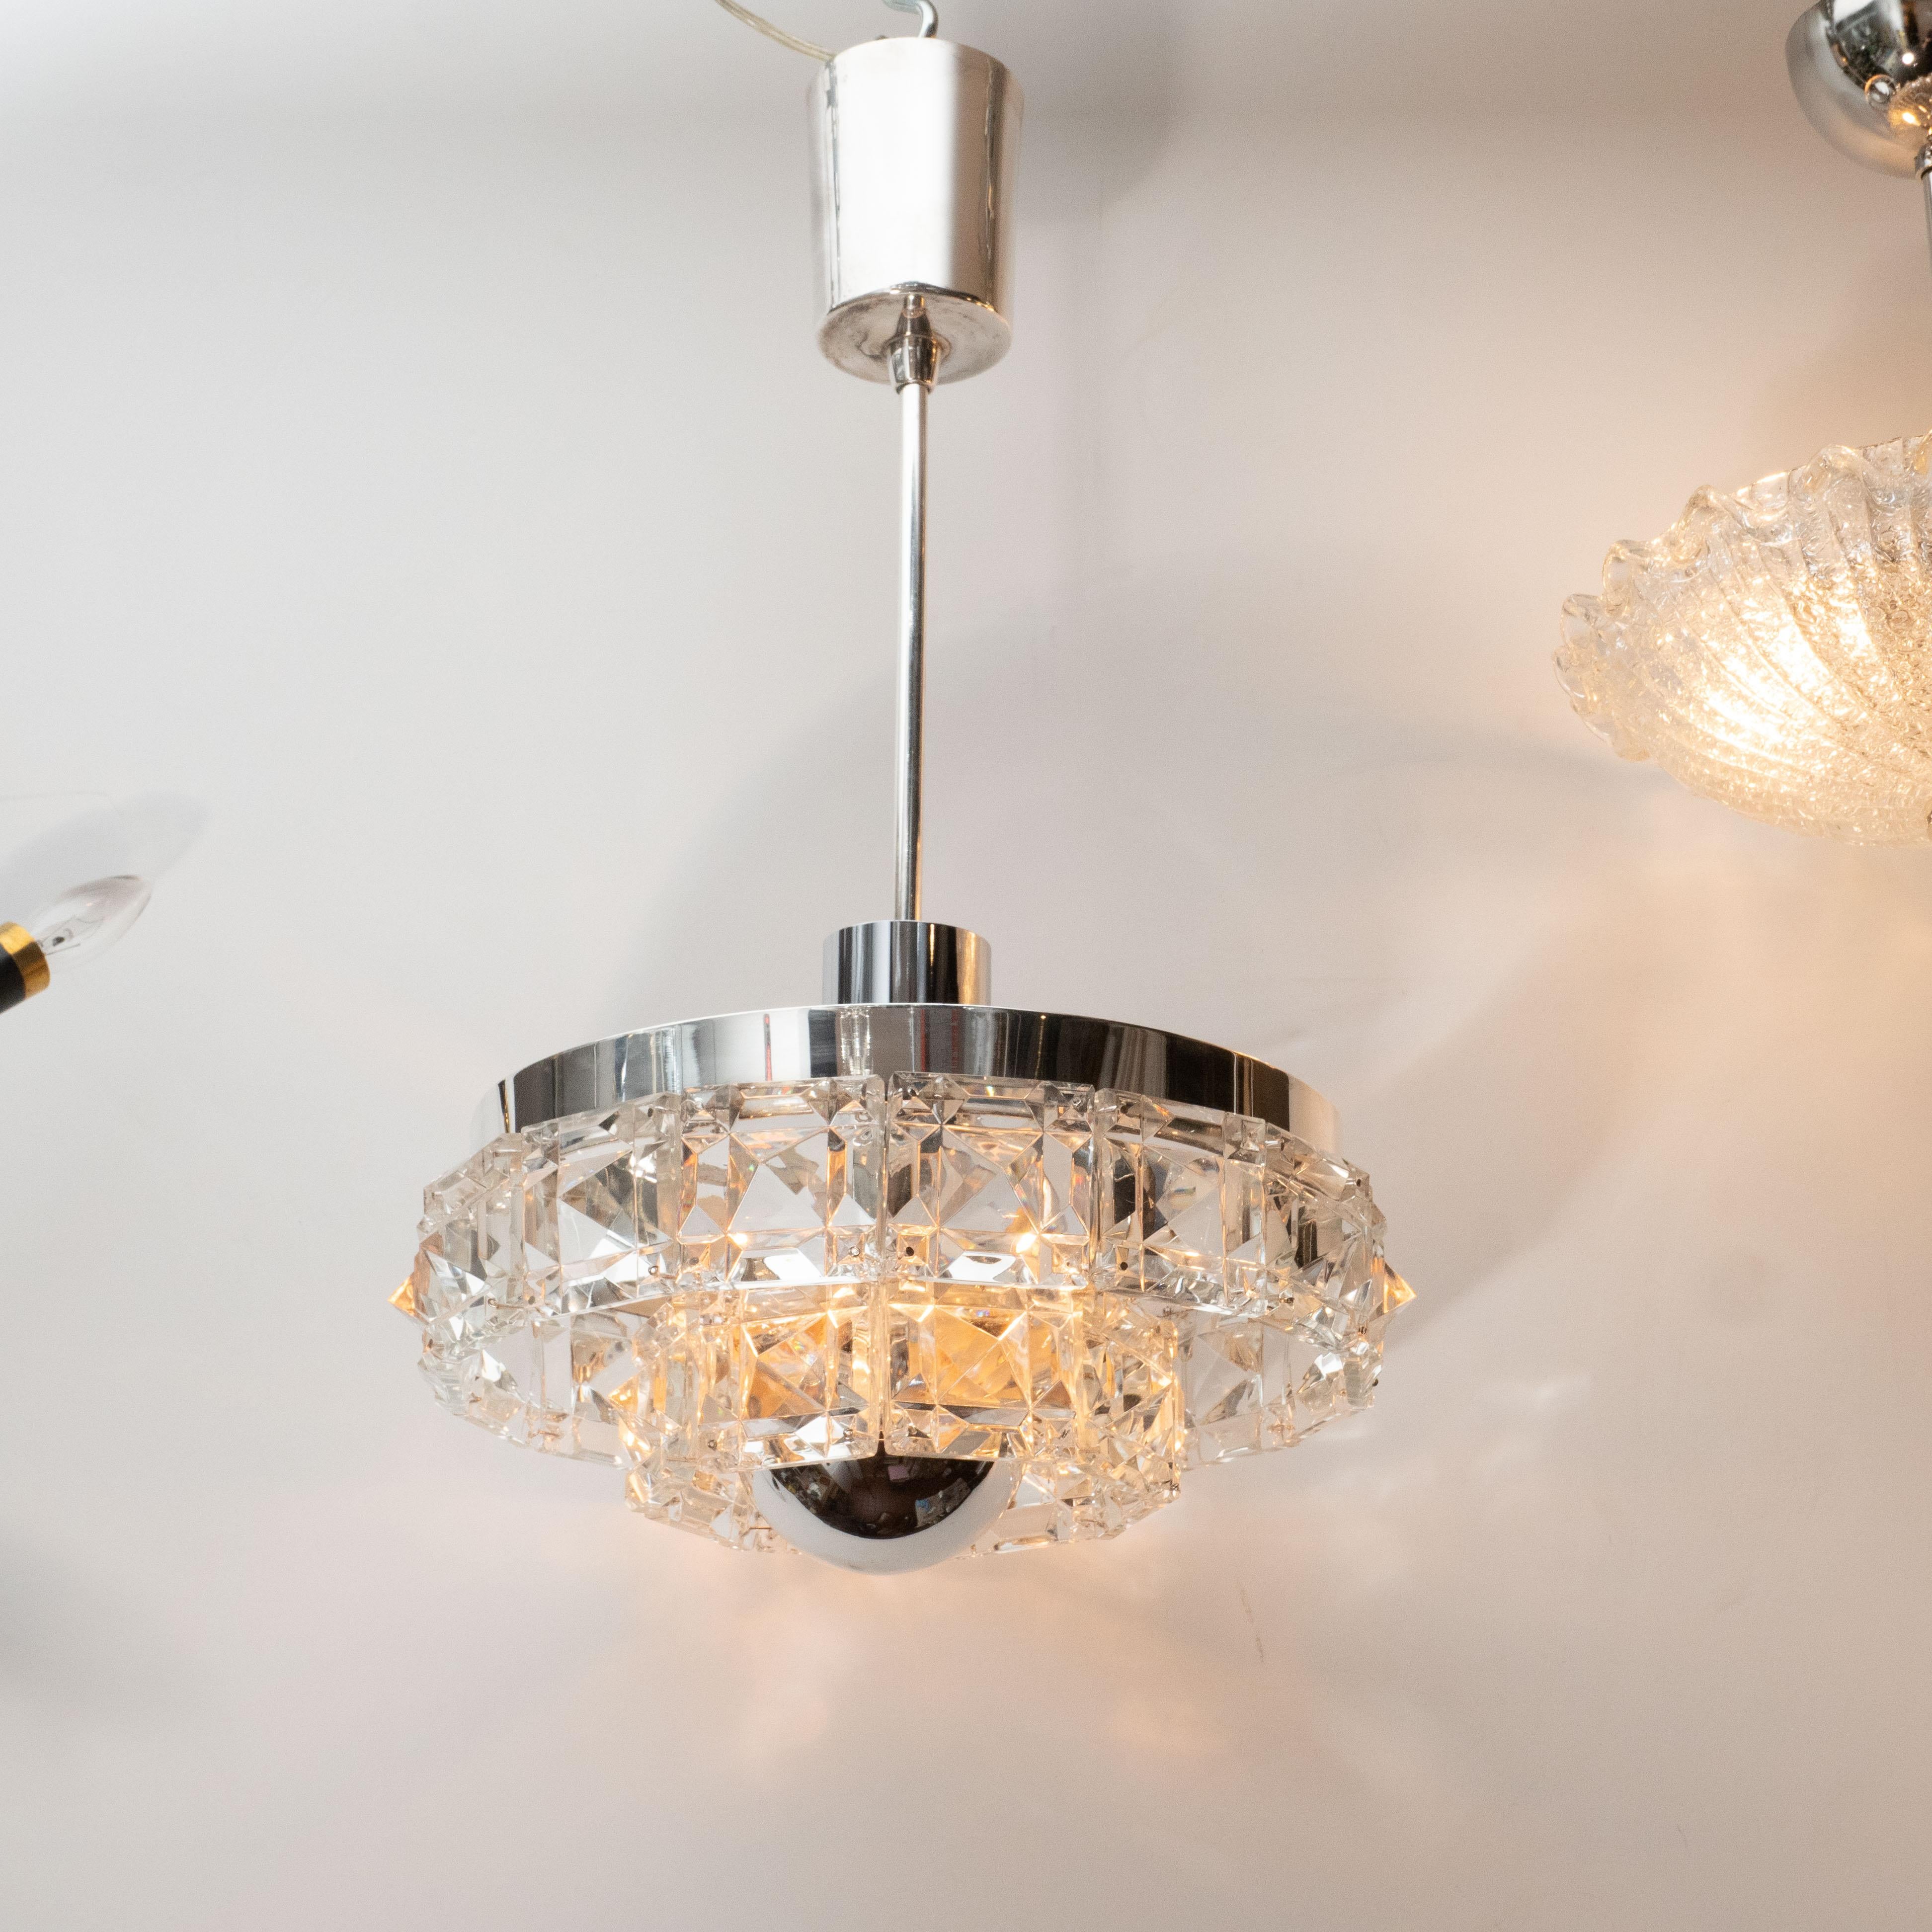 This elegant Mid-Century Modern chandelier was realized by the esteemed maker Kinkeldey in Austria circa 1960. It features two circular tiers of faceted crystal (resembling oversized cut diamonds) connected to a polished chrome frame. The fixture